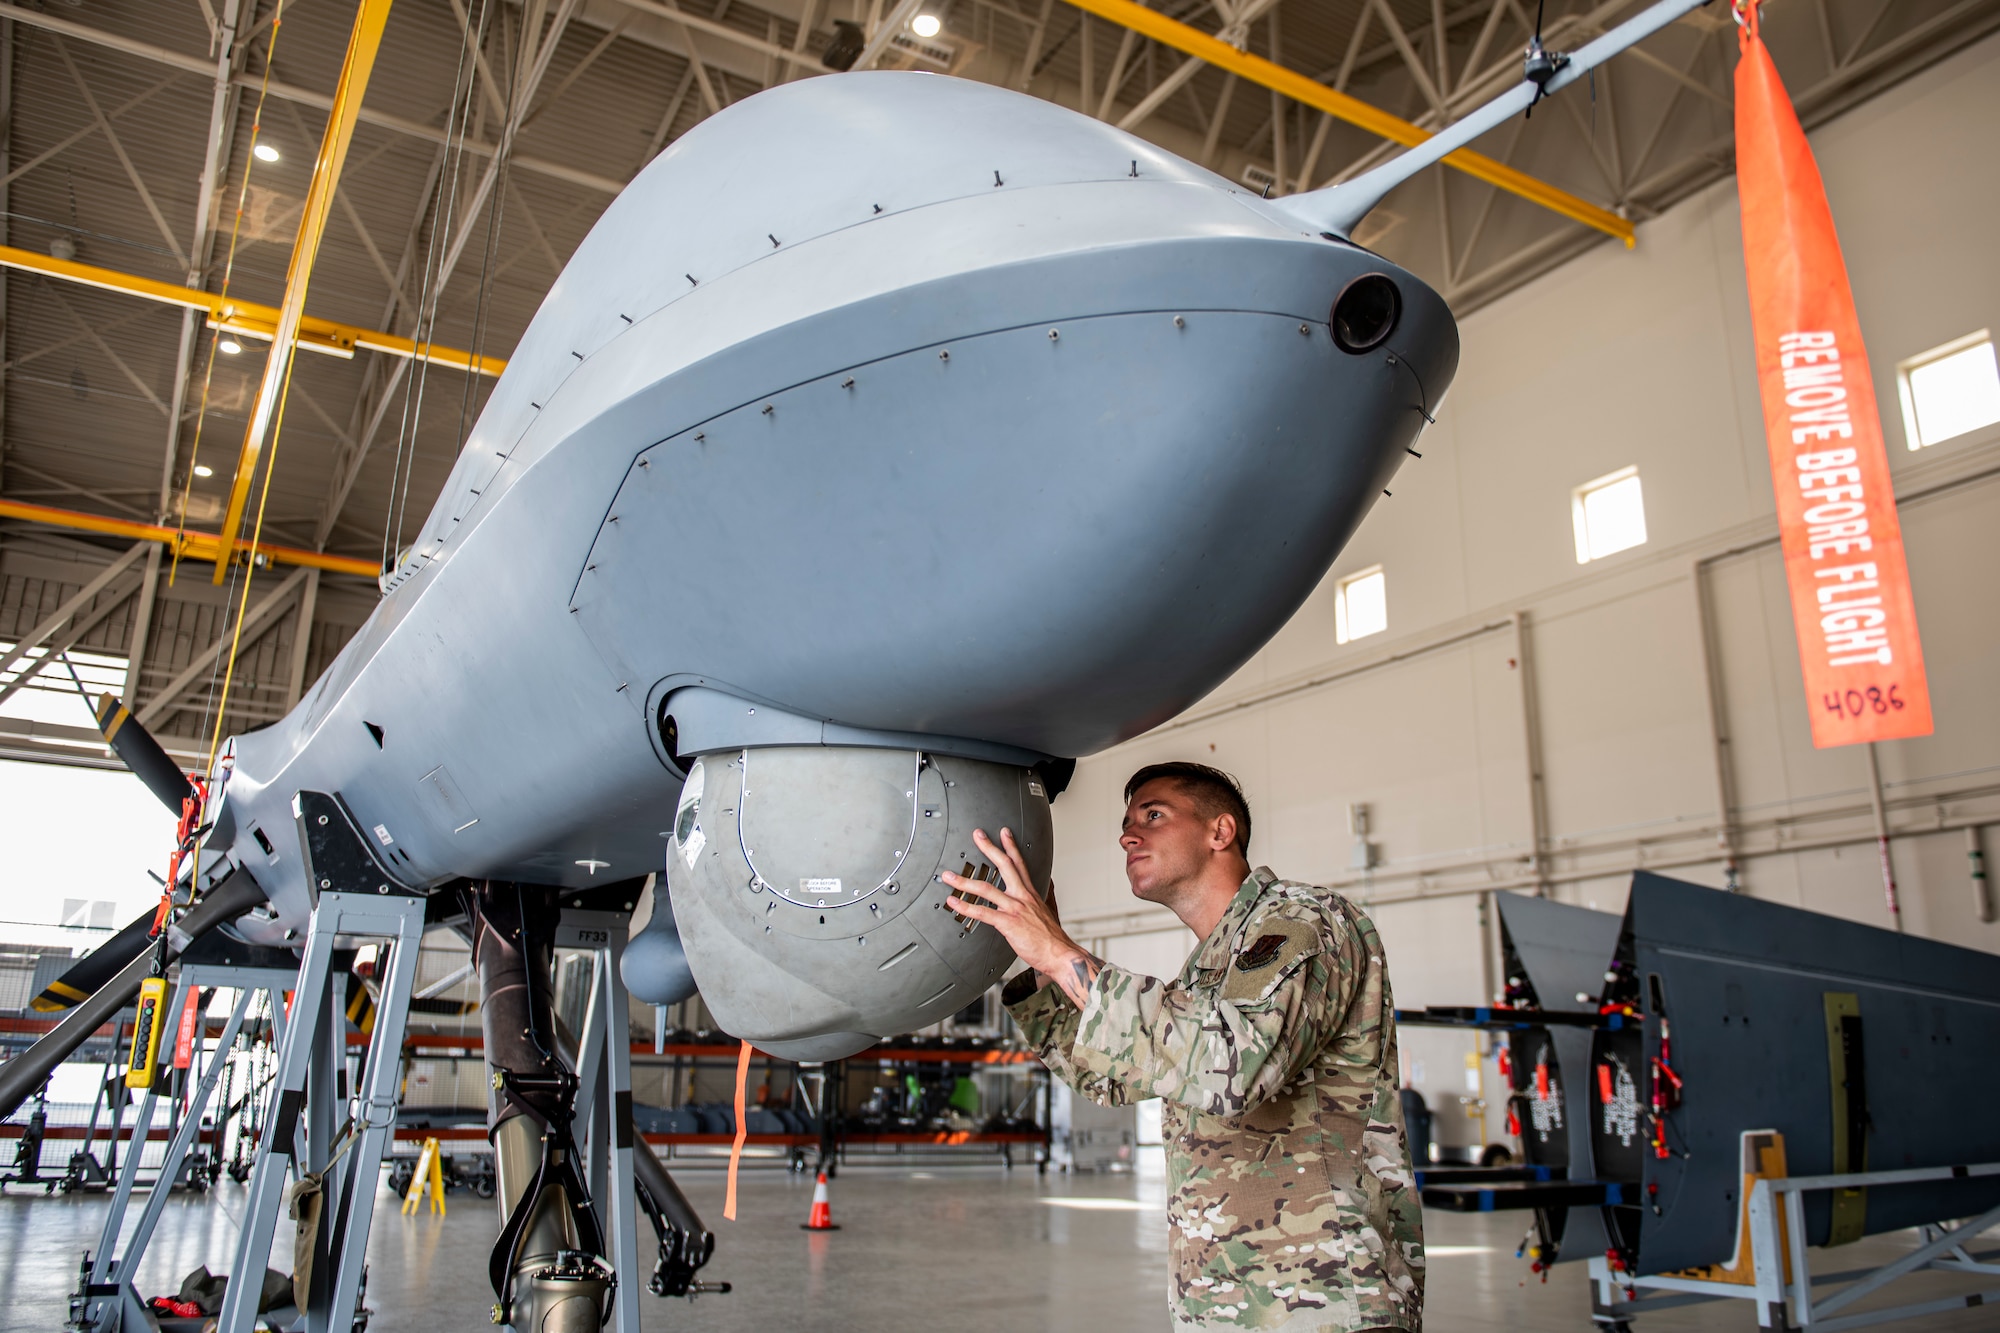 Senior Airman Levi stands under an MQ-9 Reaper and inspects the multi-spectral targeting system for flaws.